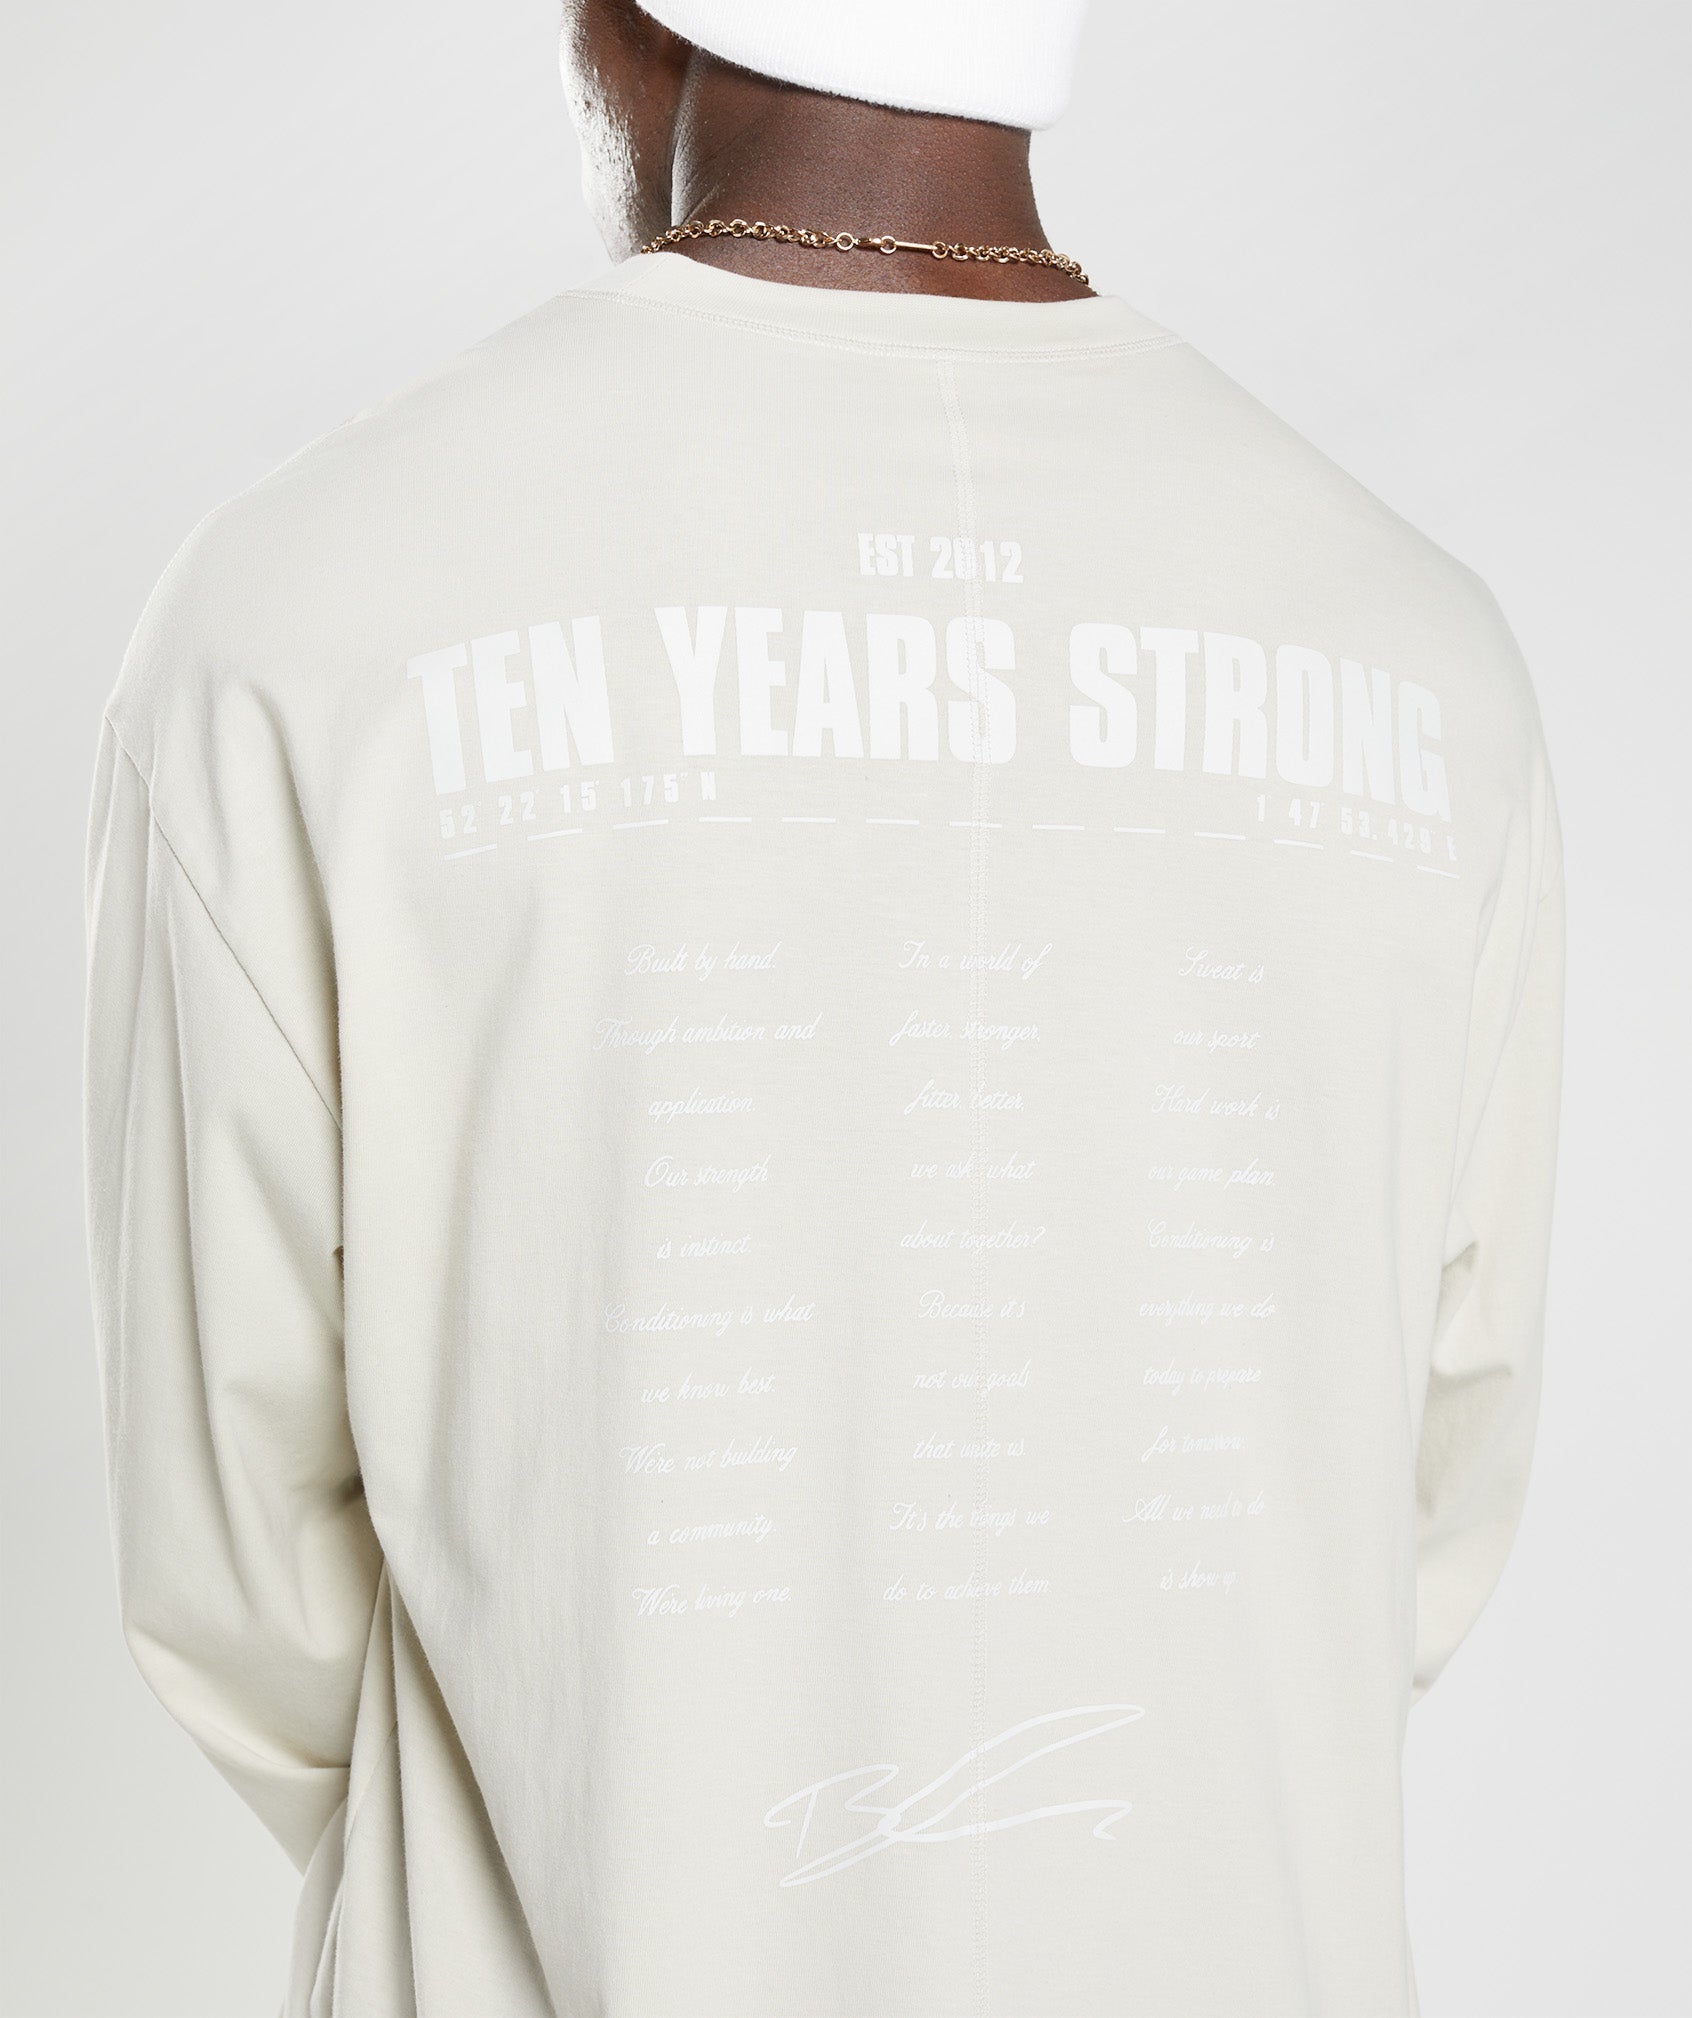 GS10 Year Oversized Long Sleeve T-Shirt in Chalky Grey - view 5